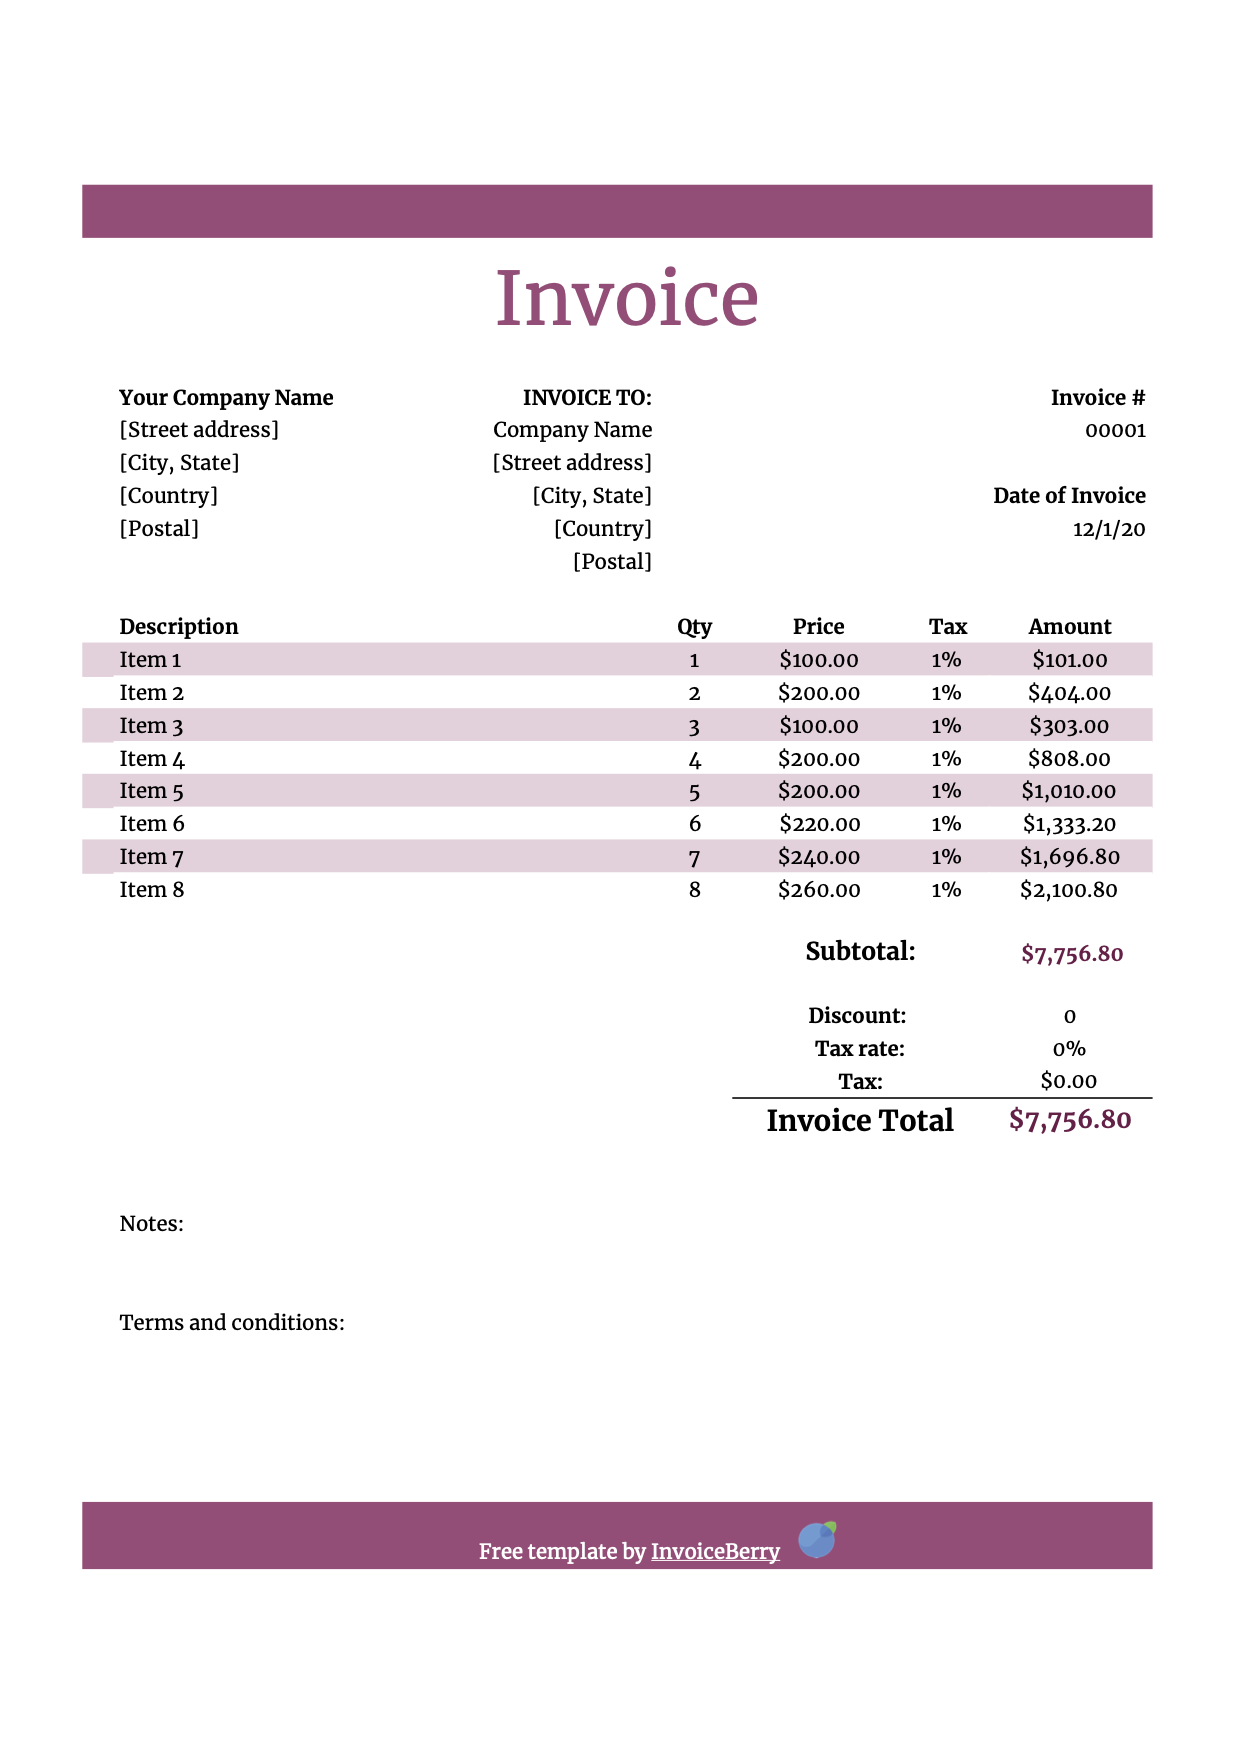 Free Numbers invoice templates - get invoice templates for Mac Inside Free Invoice Template Word Mac